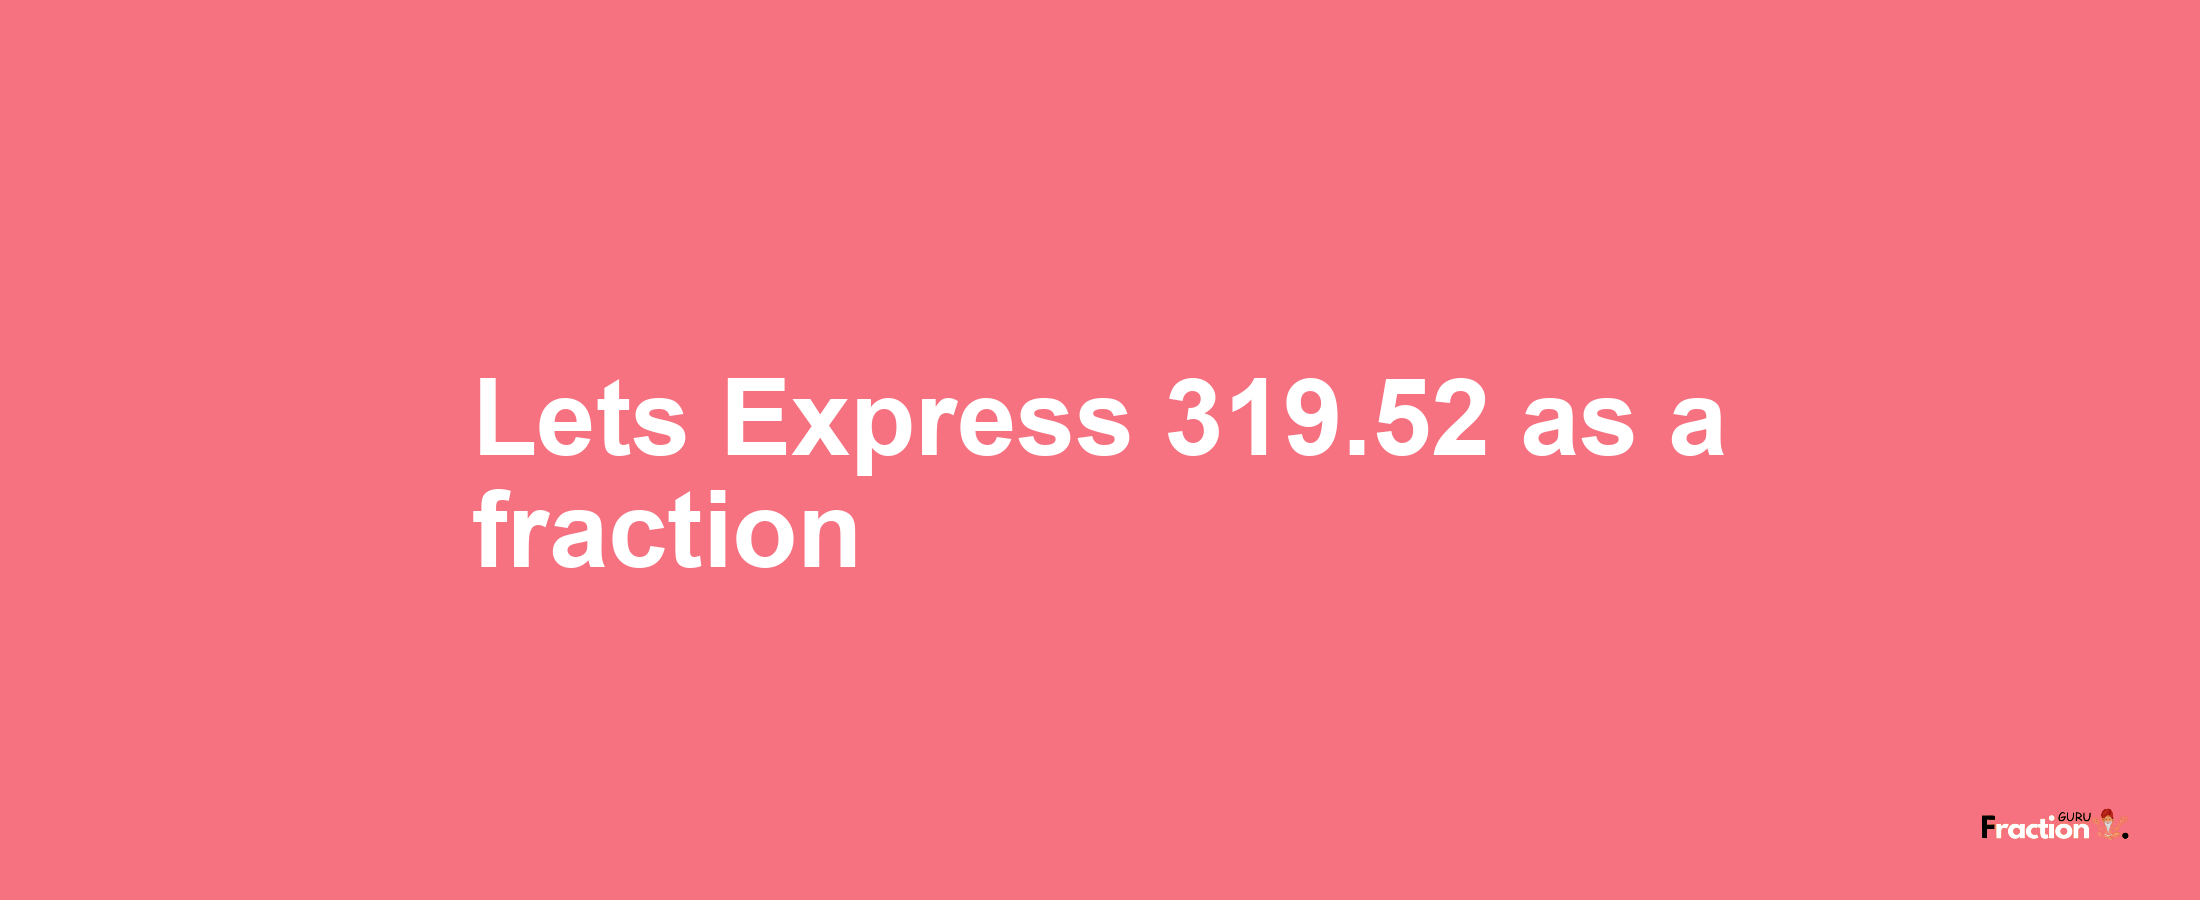 Lets Express 319.52 as afraction